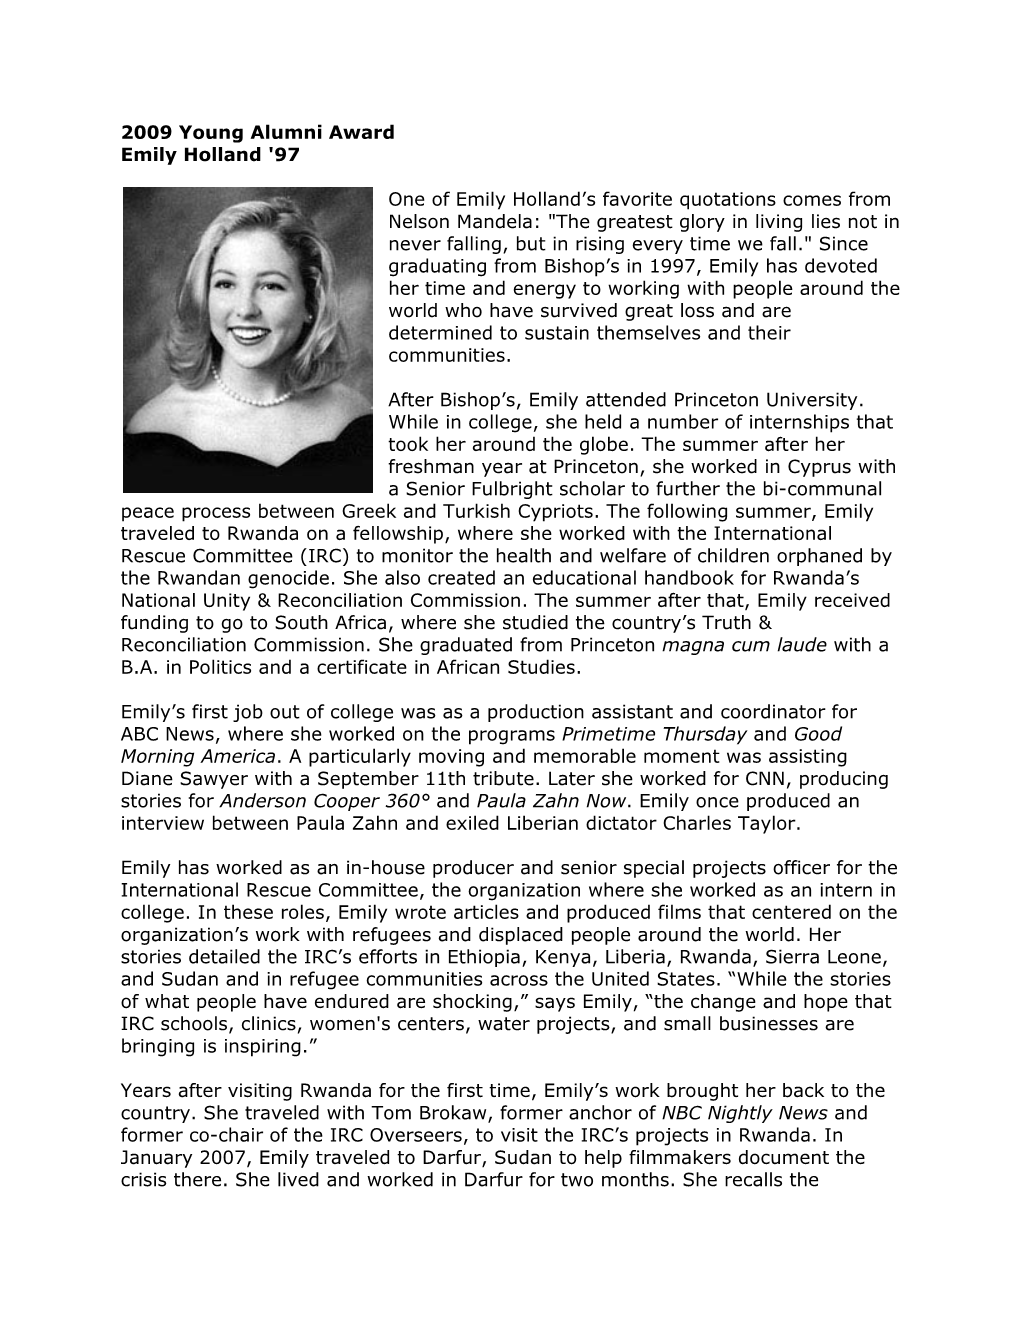 2009 Young Alumni Award Emily Holland '97 One of Emily Holland's Favorite Quotations Comes from Nelson Mandela: "The Grea